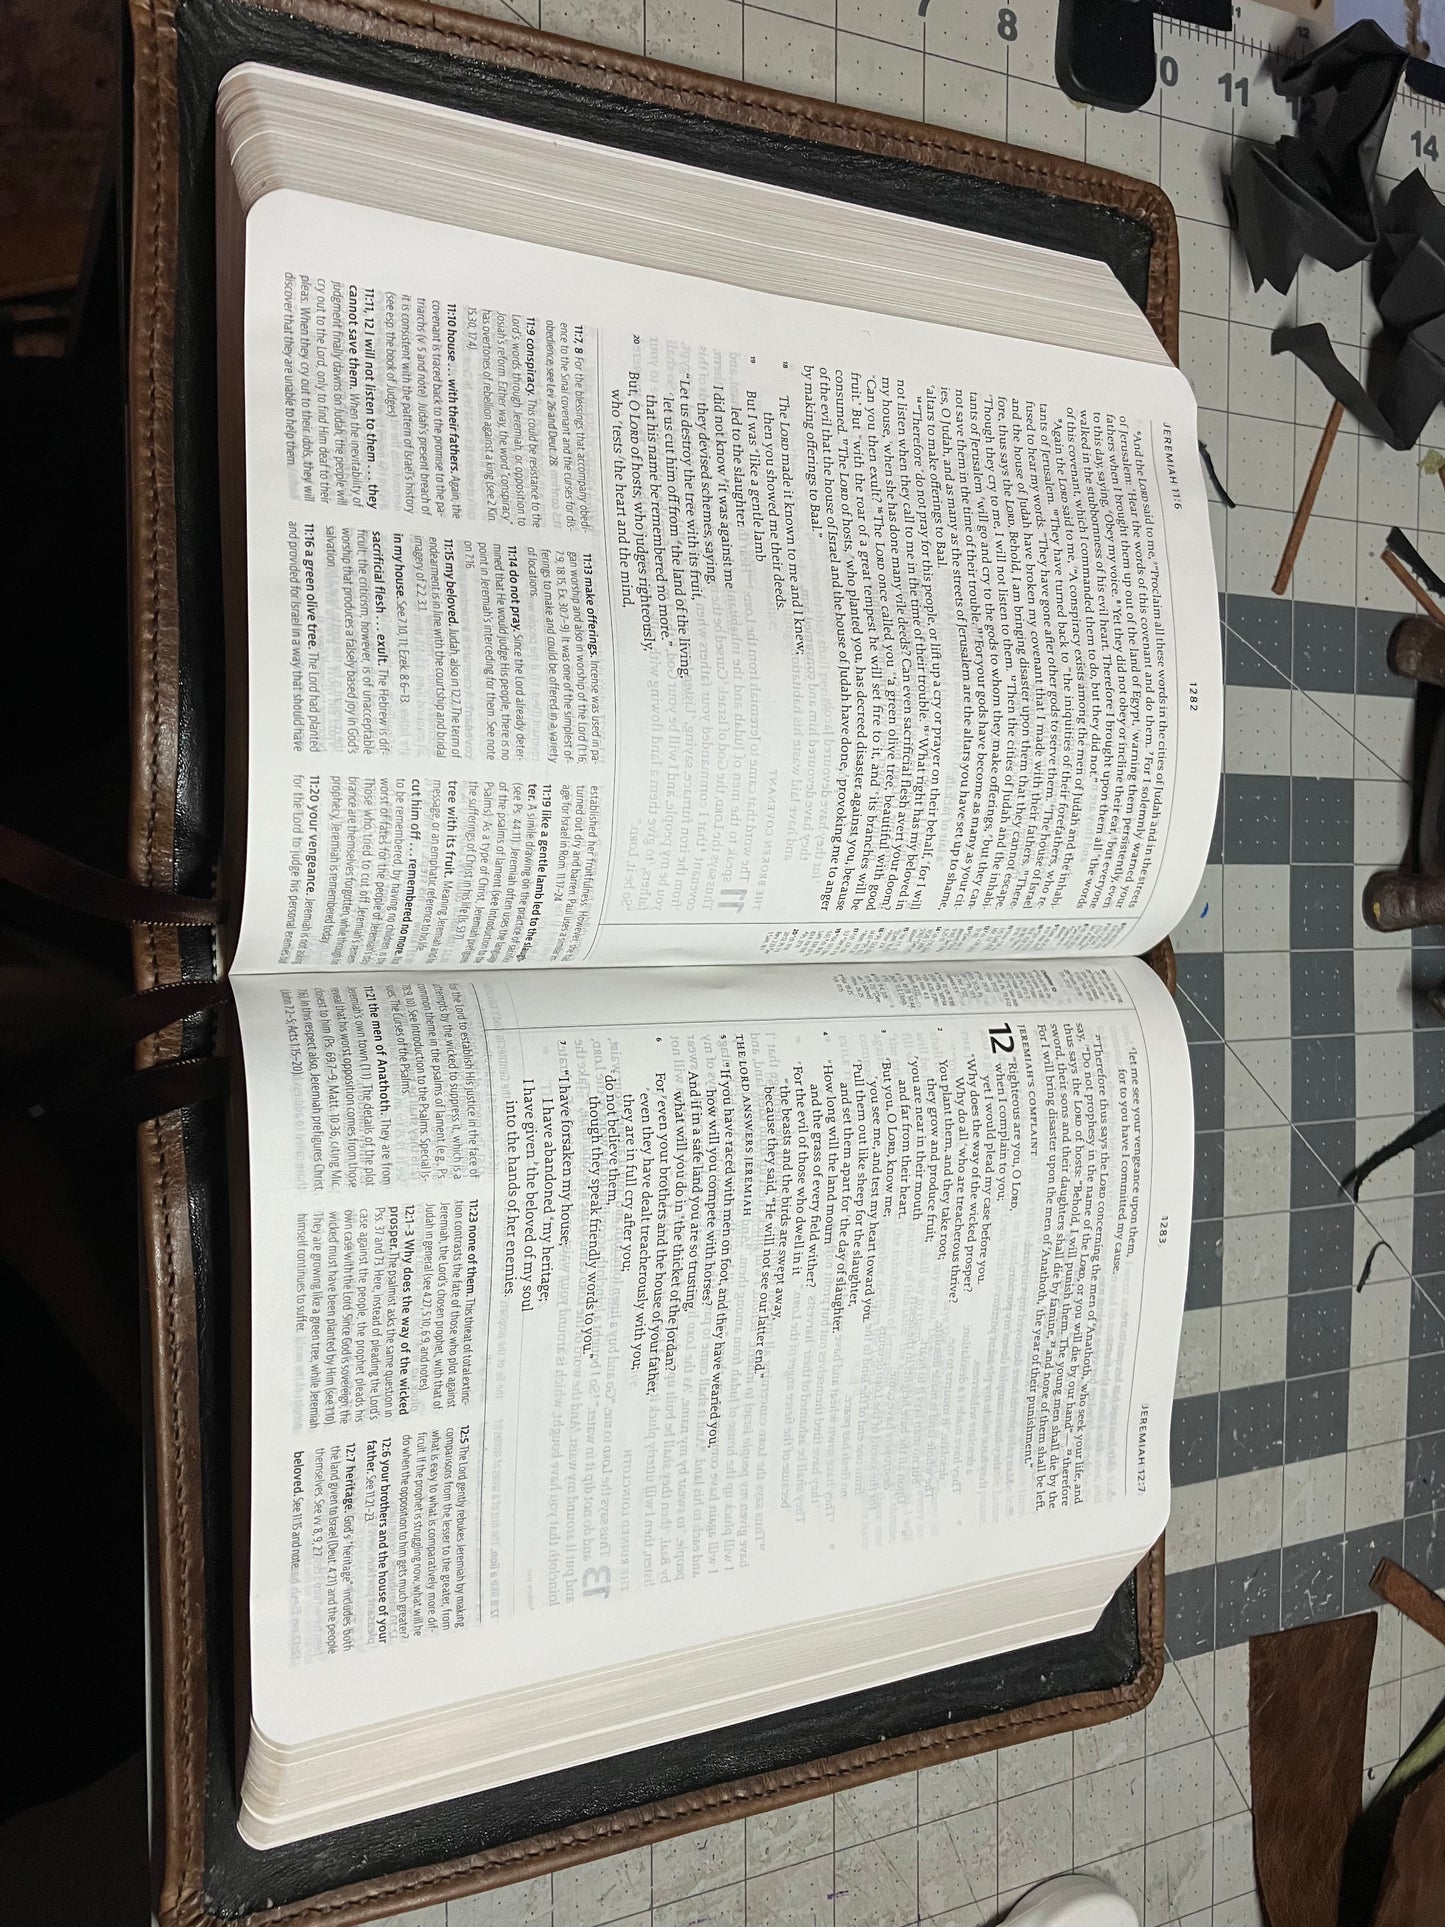 Reformation Study Bible Full Edition w/ Creeds and Confessions